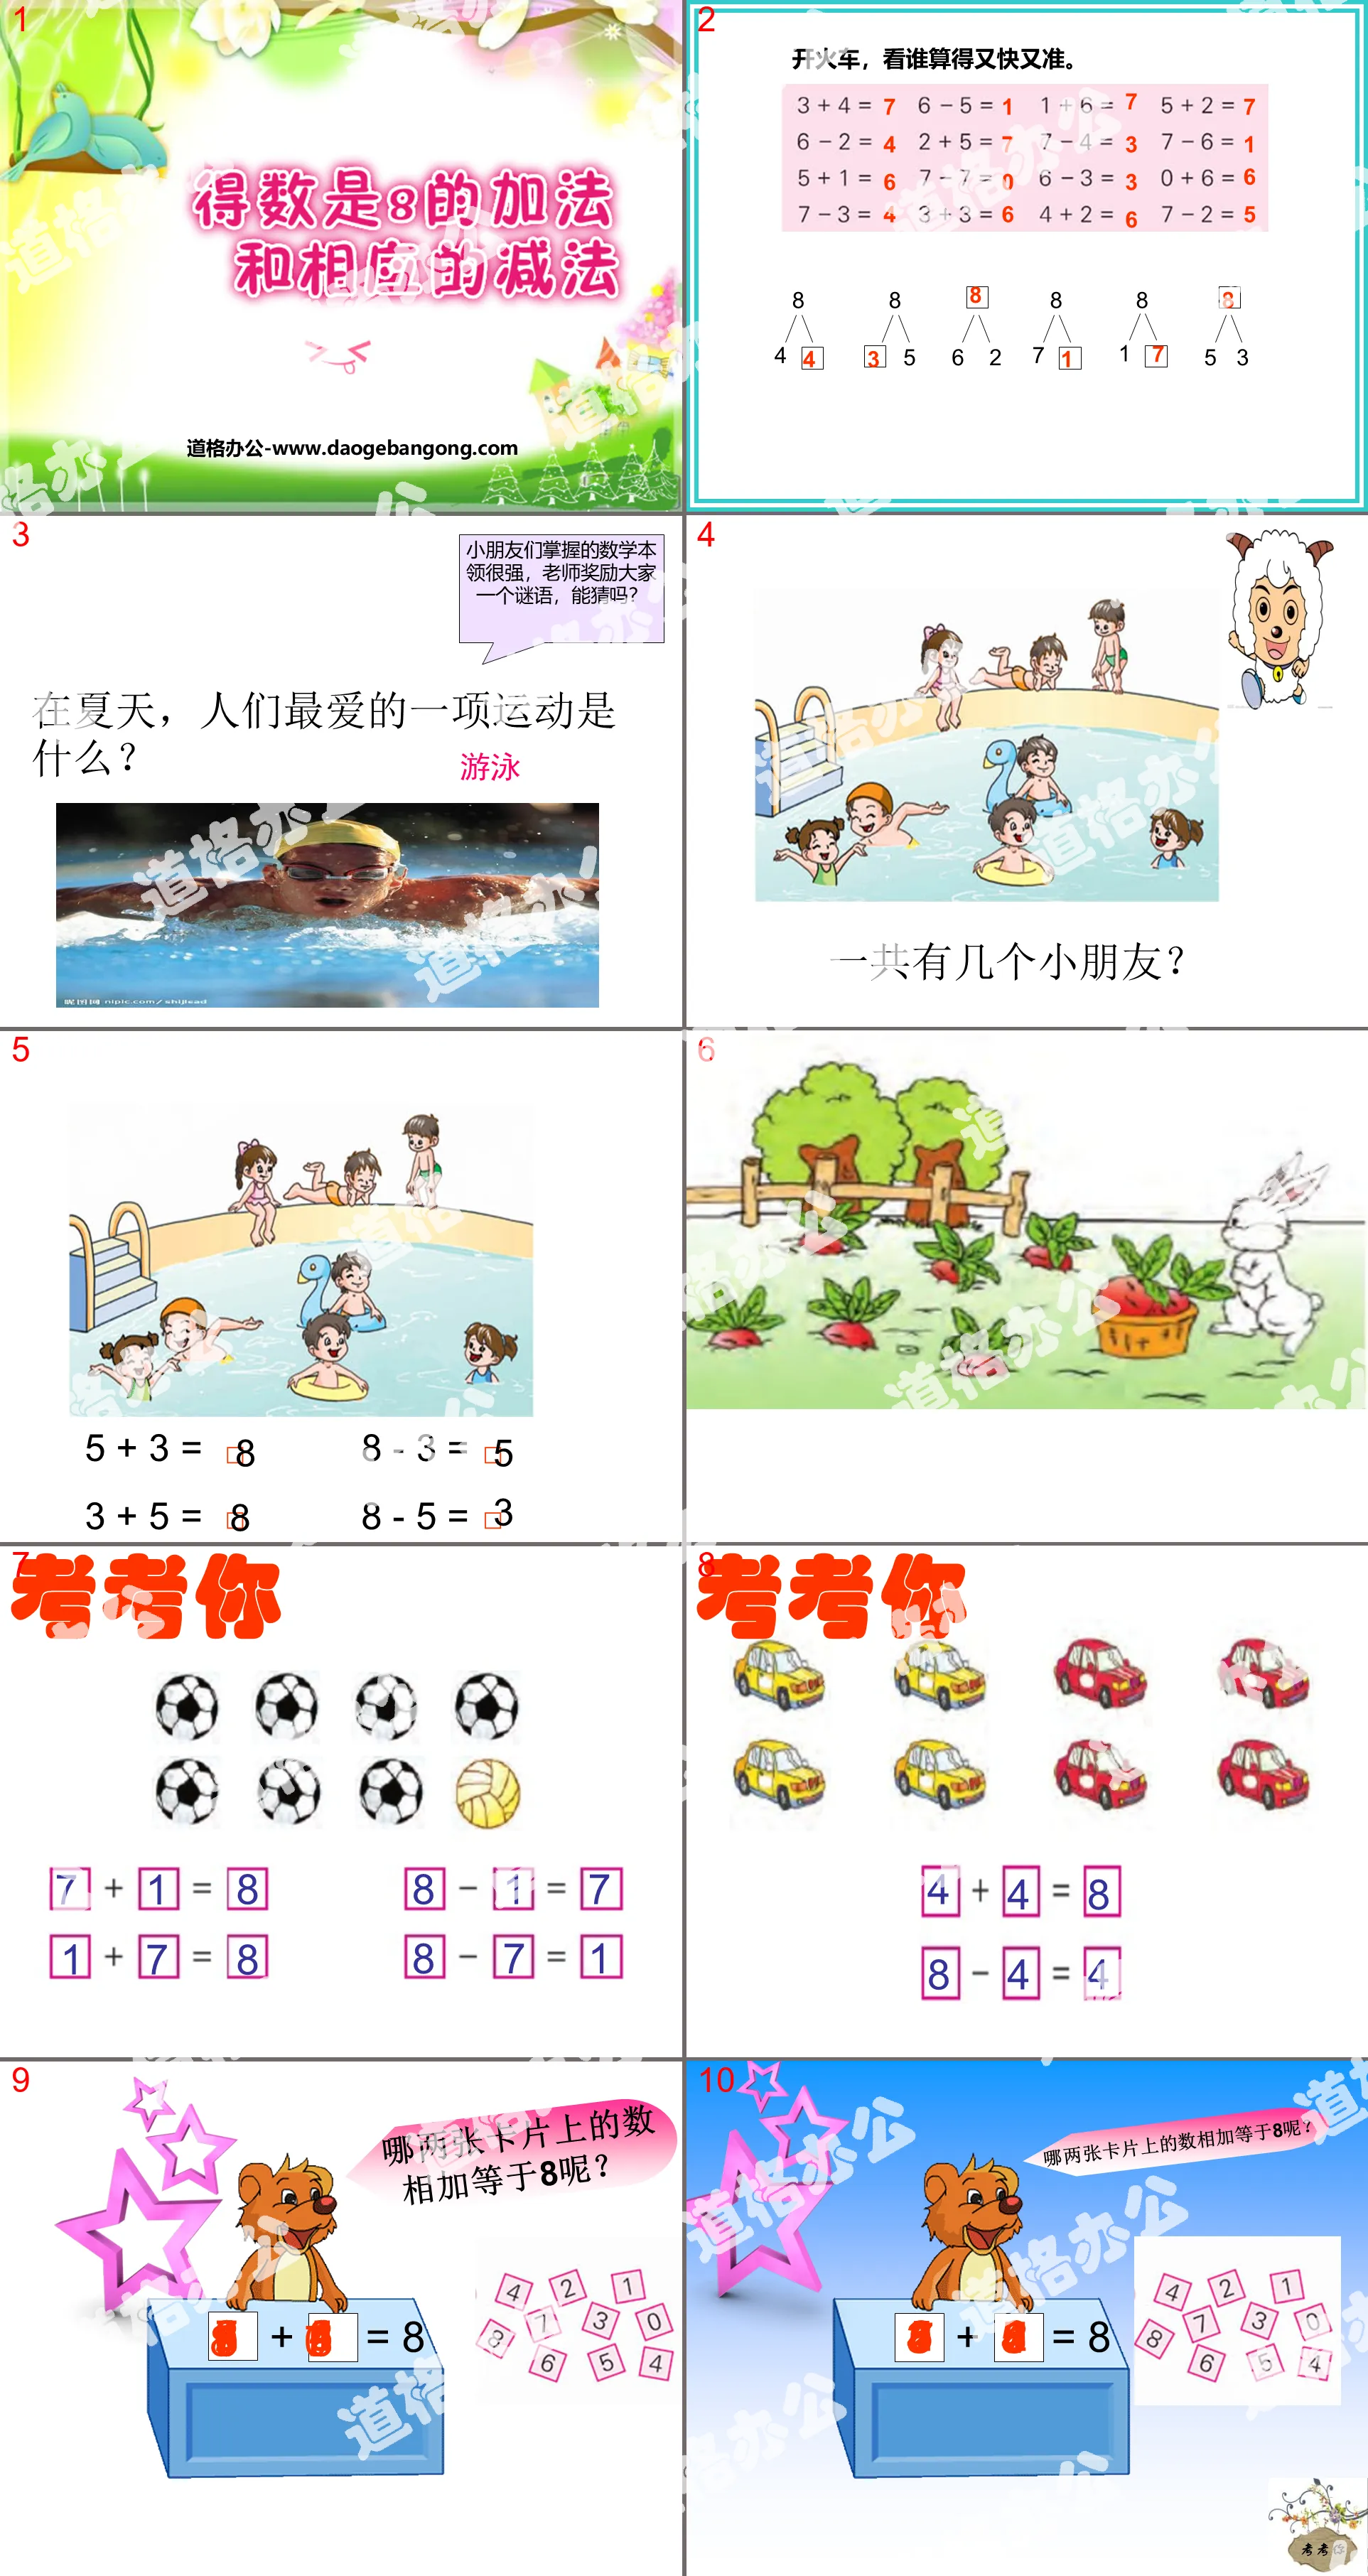 "Addition and corresponding subtraction to get the number 8" PPT courseware for addition and subtraction within 10